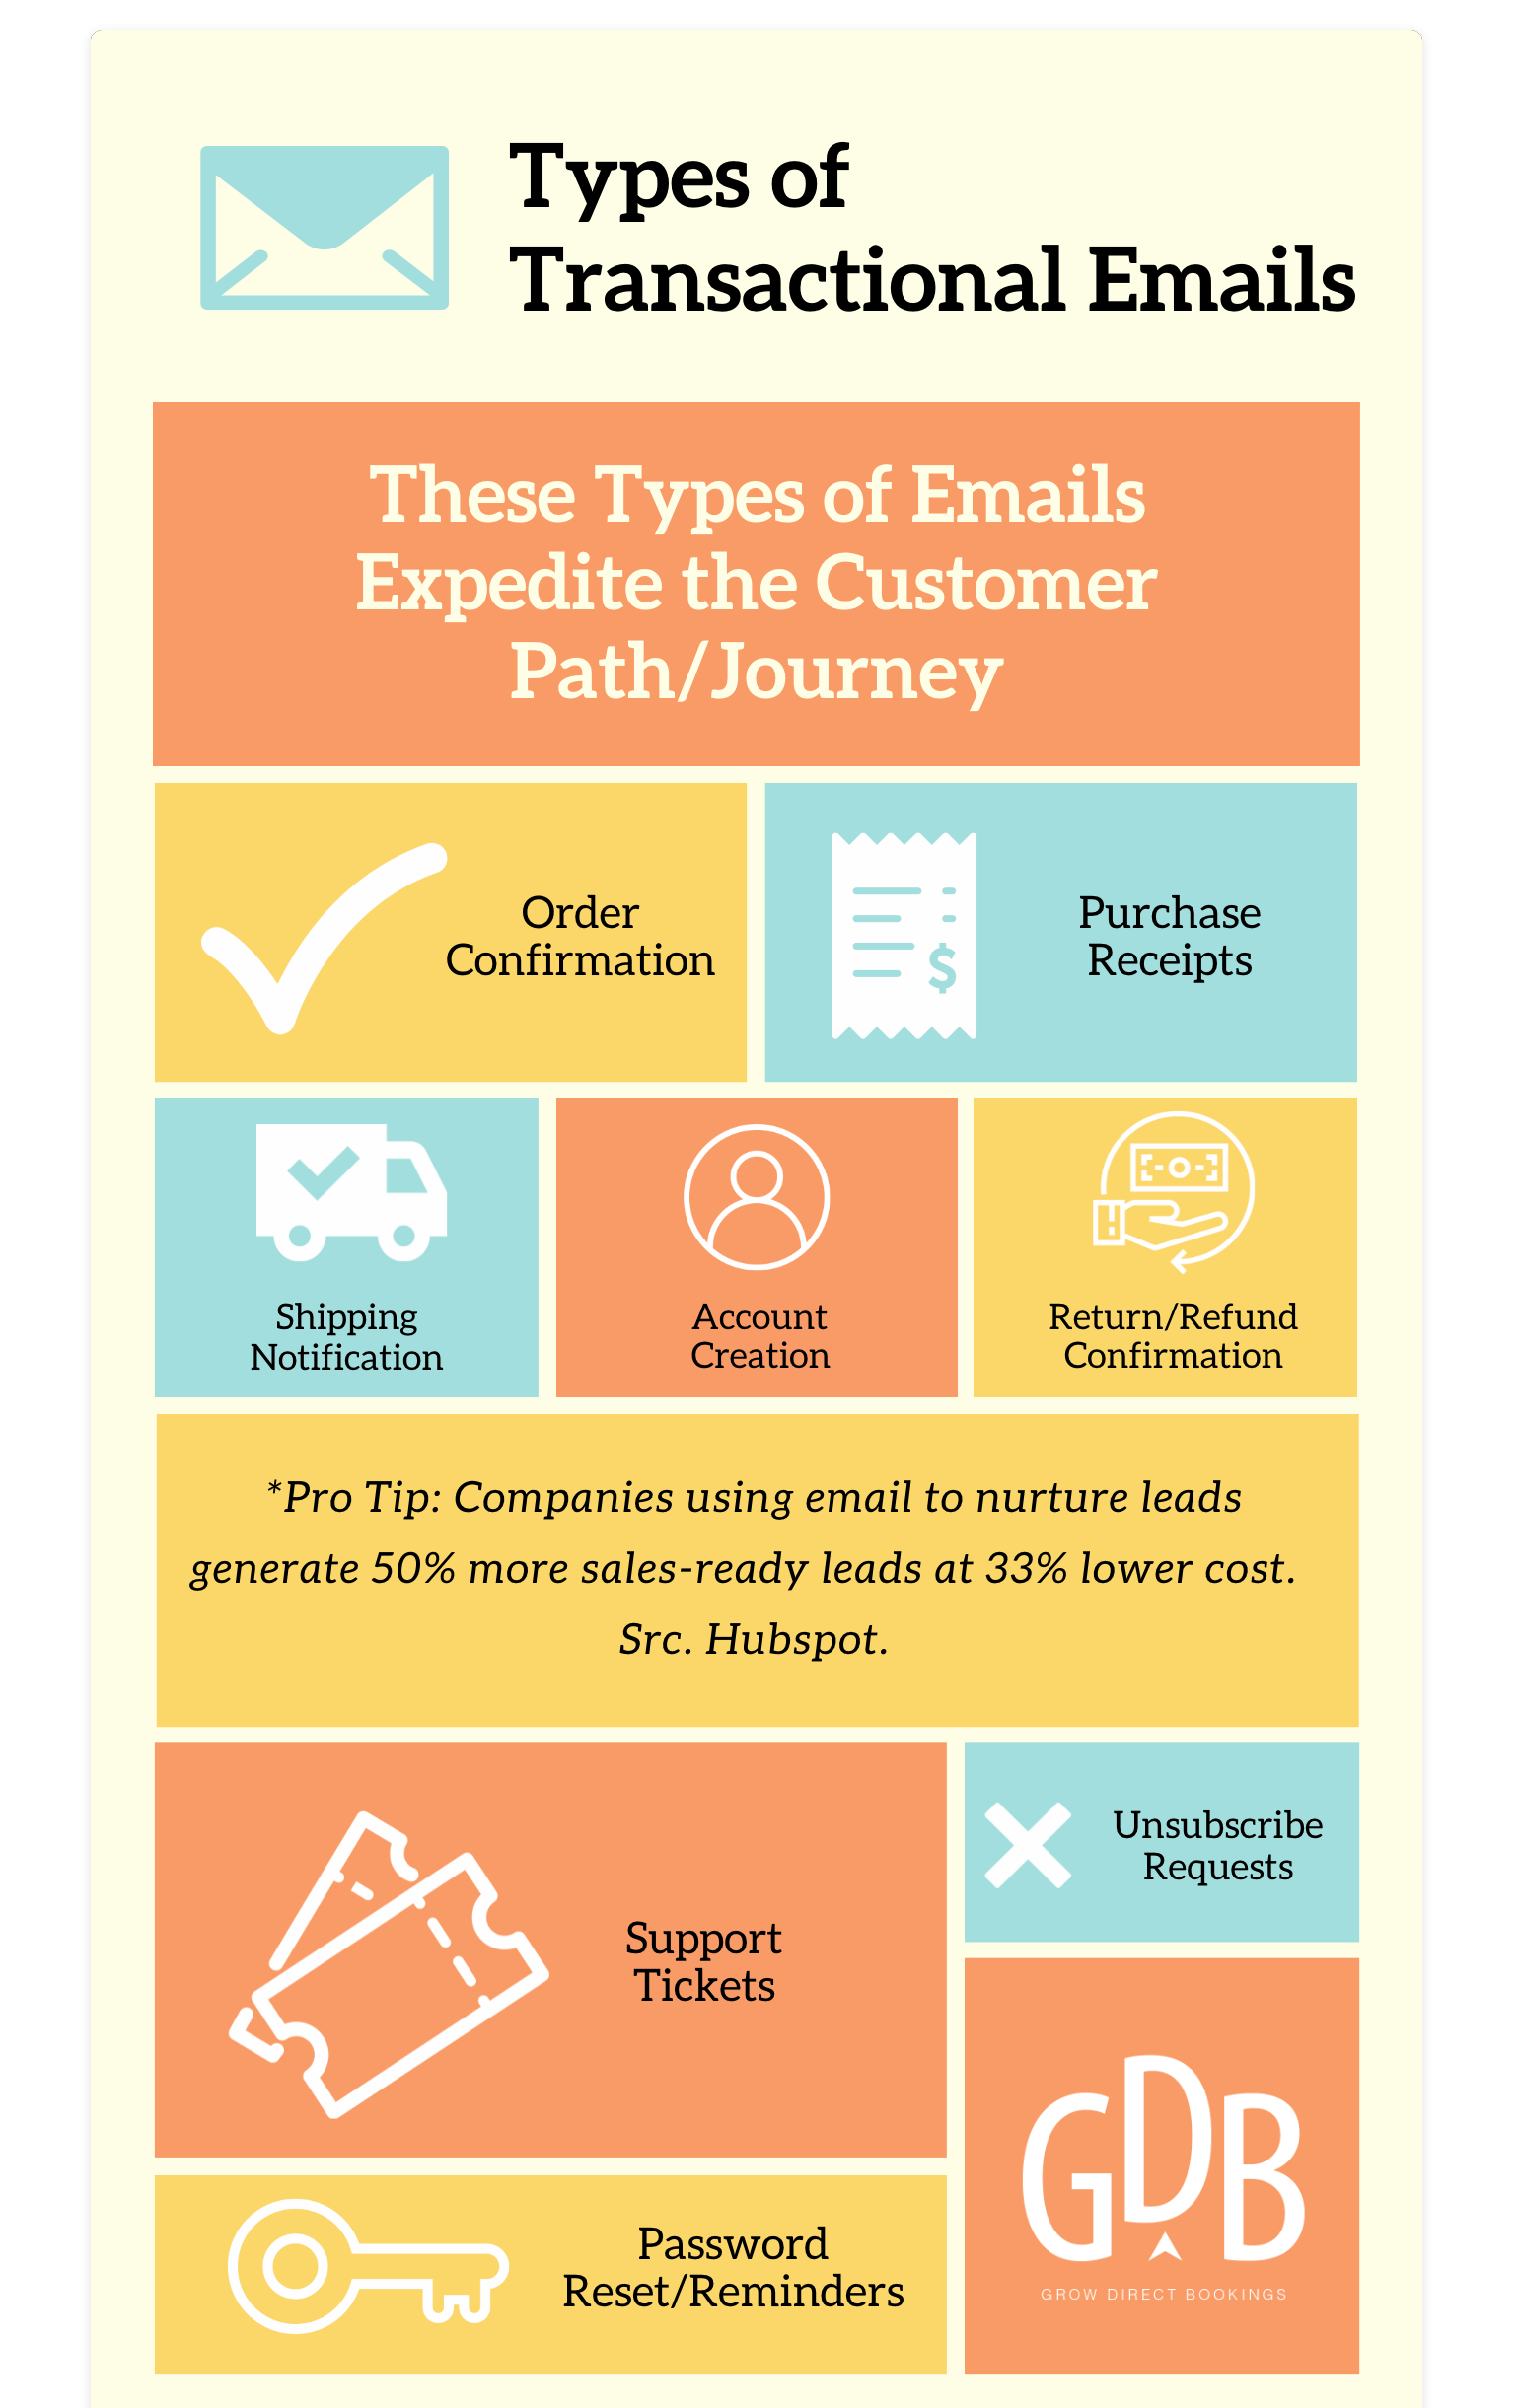 Types of Transactional Emails Infographic